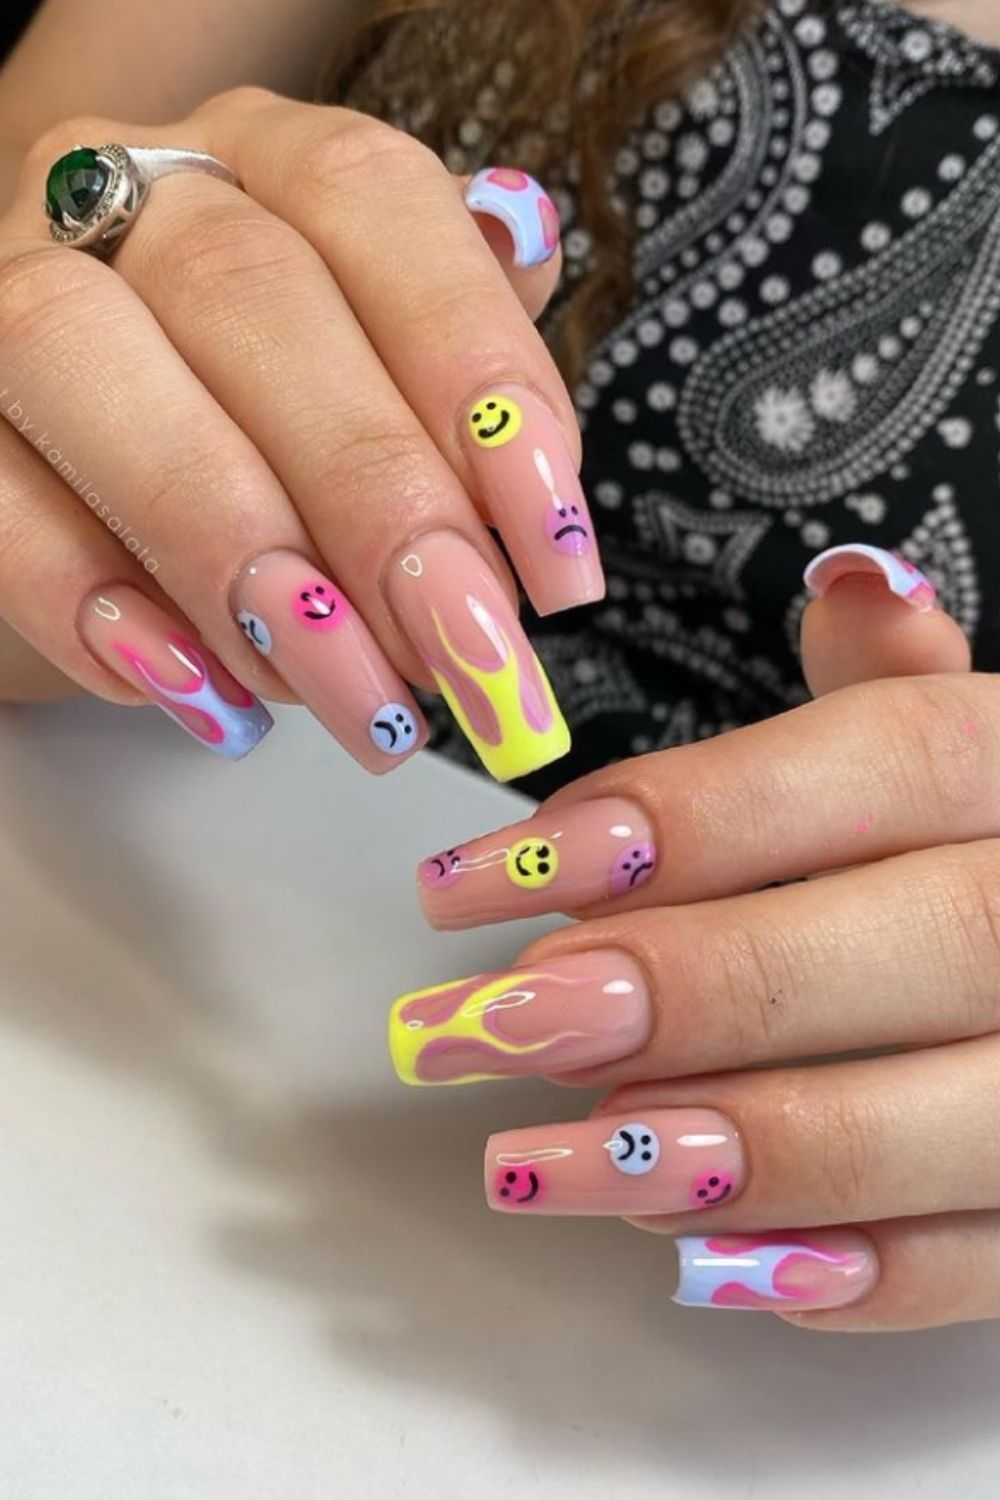 Yellow and pink coffin nail art design with smiley face